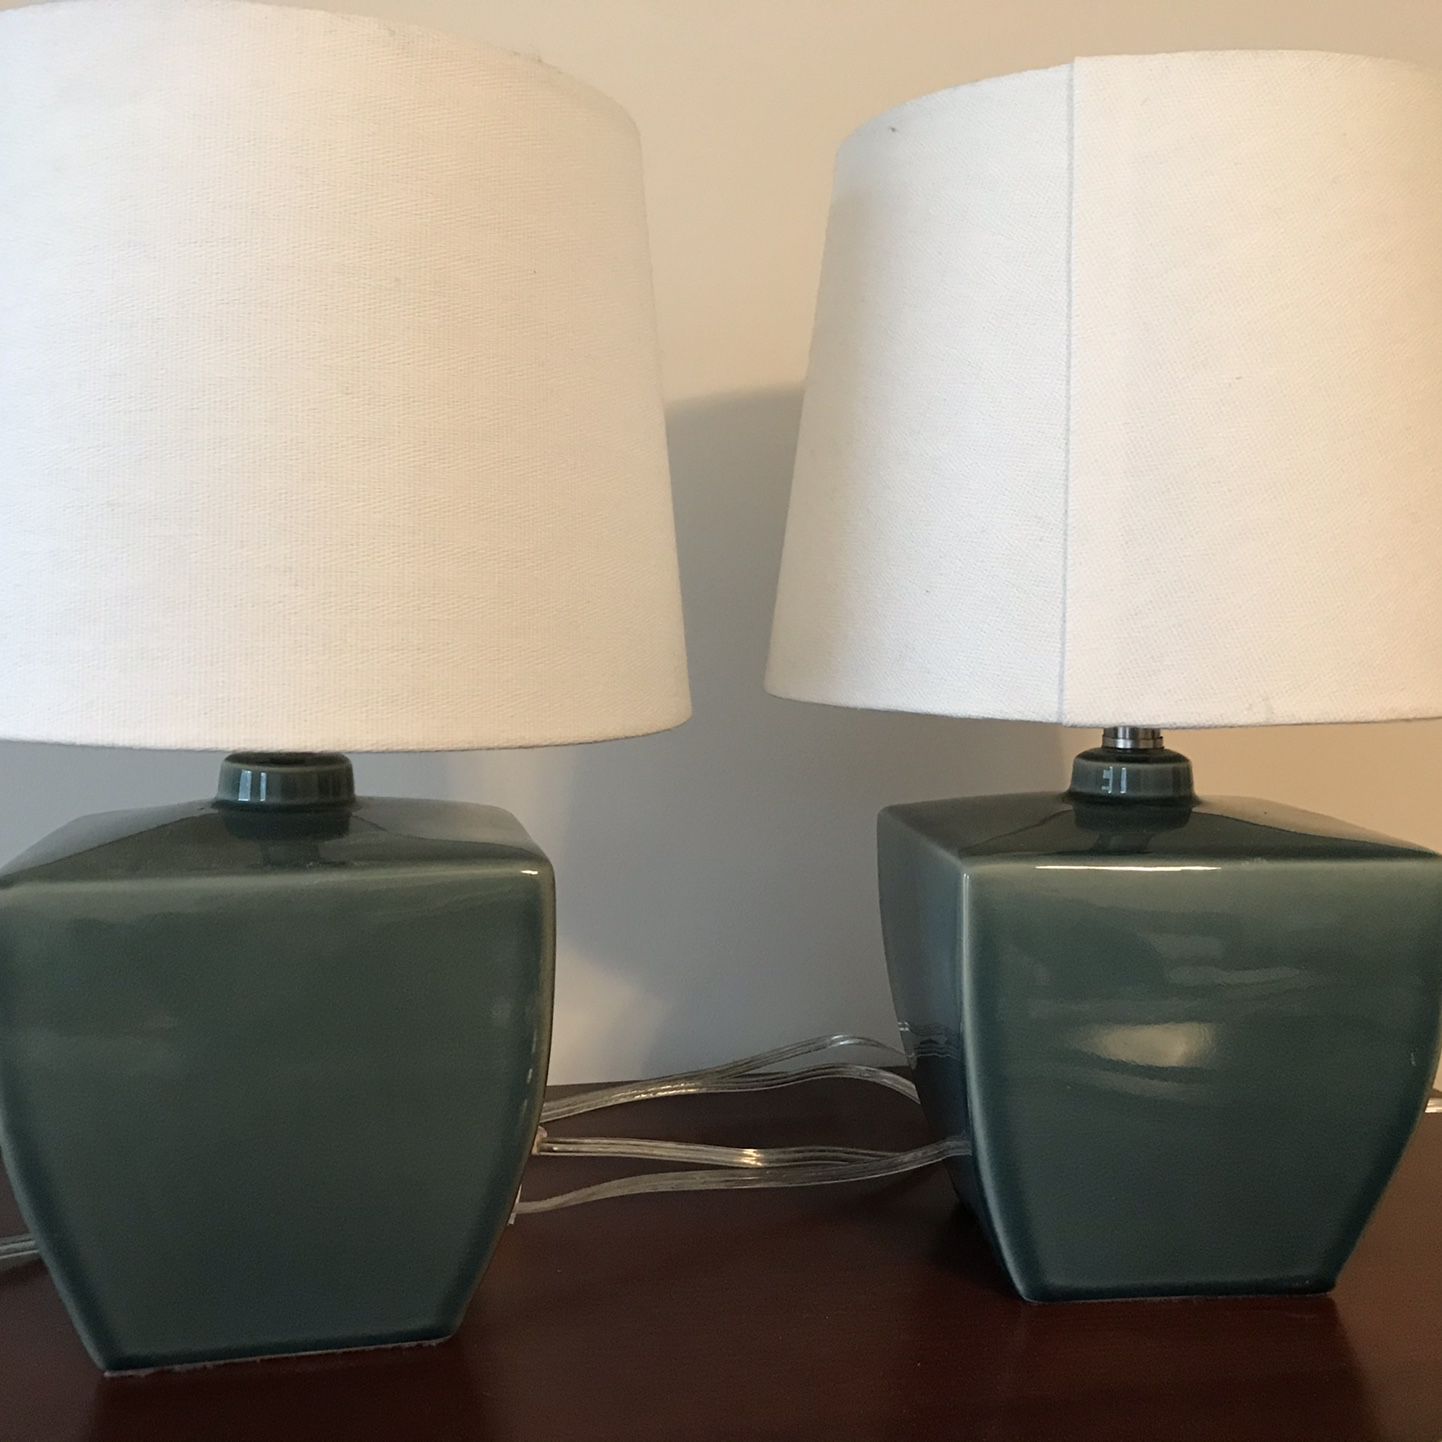 Table Lamps Set